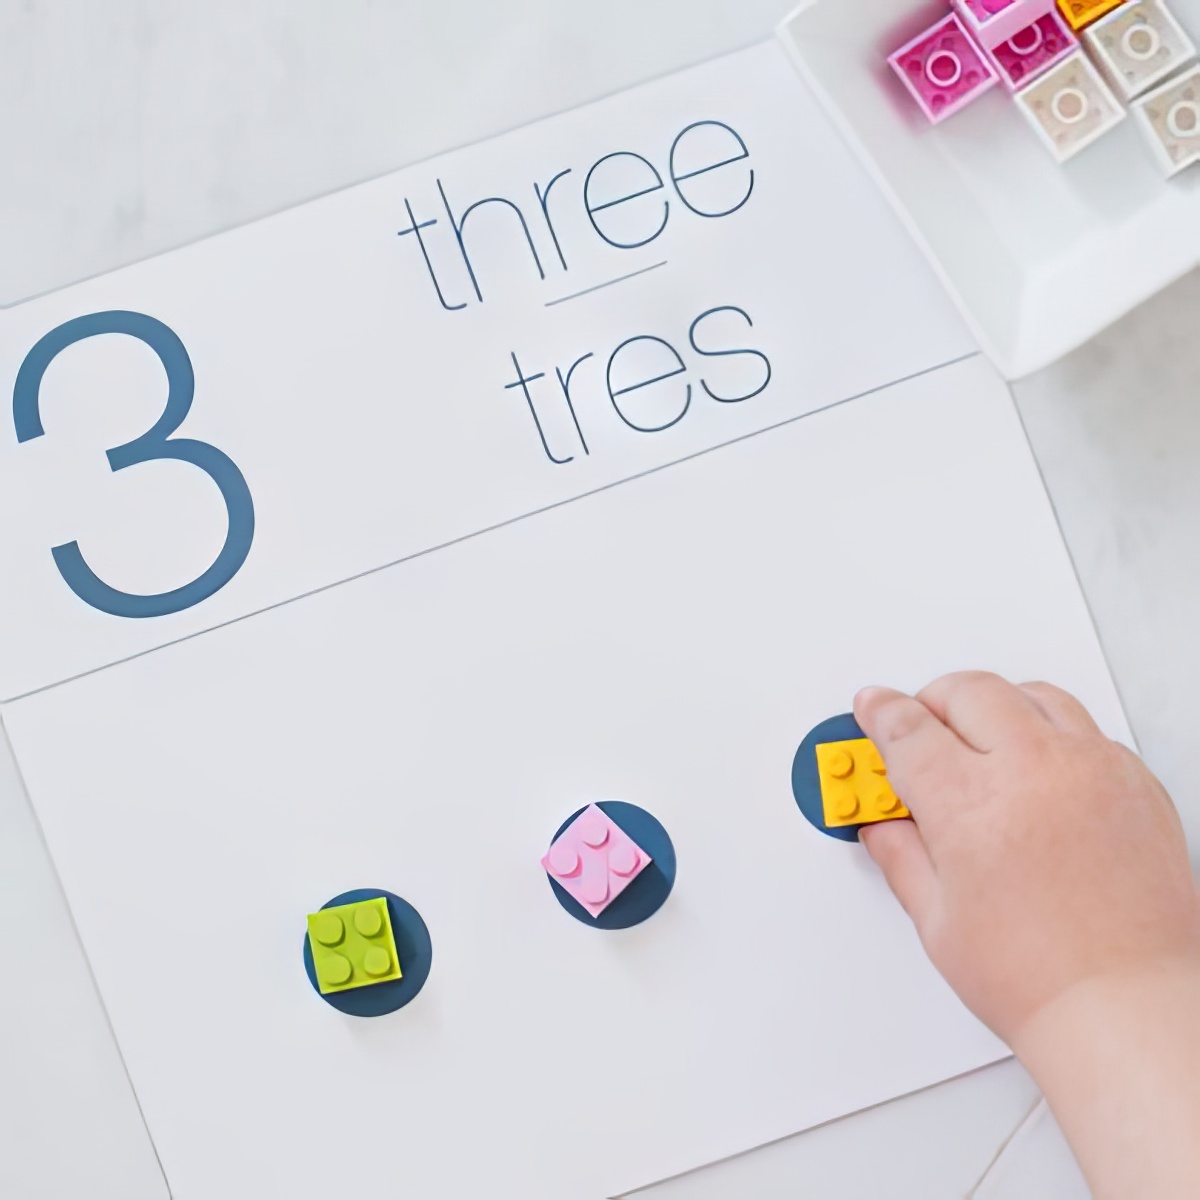 printable-counting-cards-6 learn how to count using lego blocks and printables